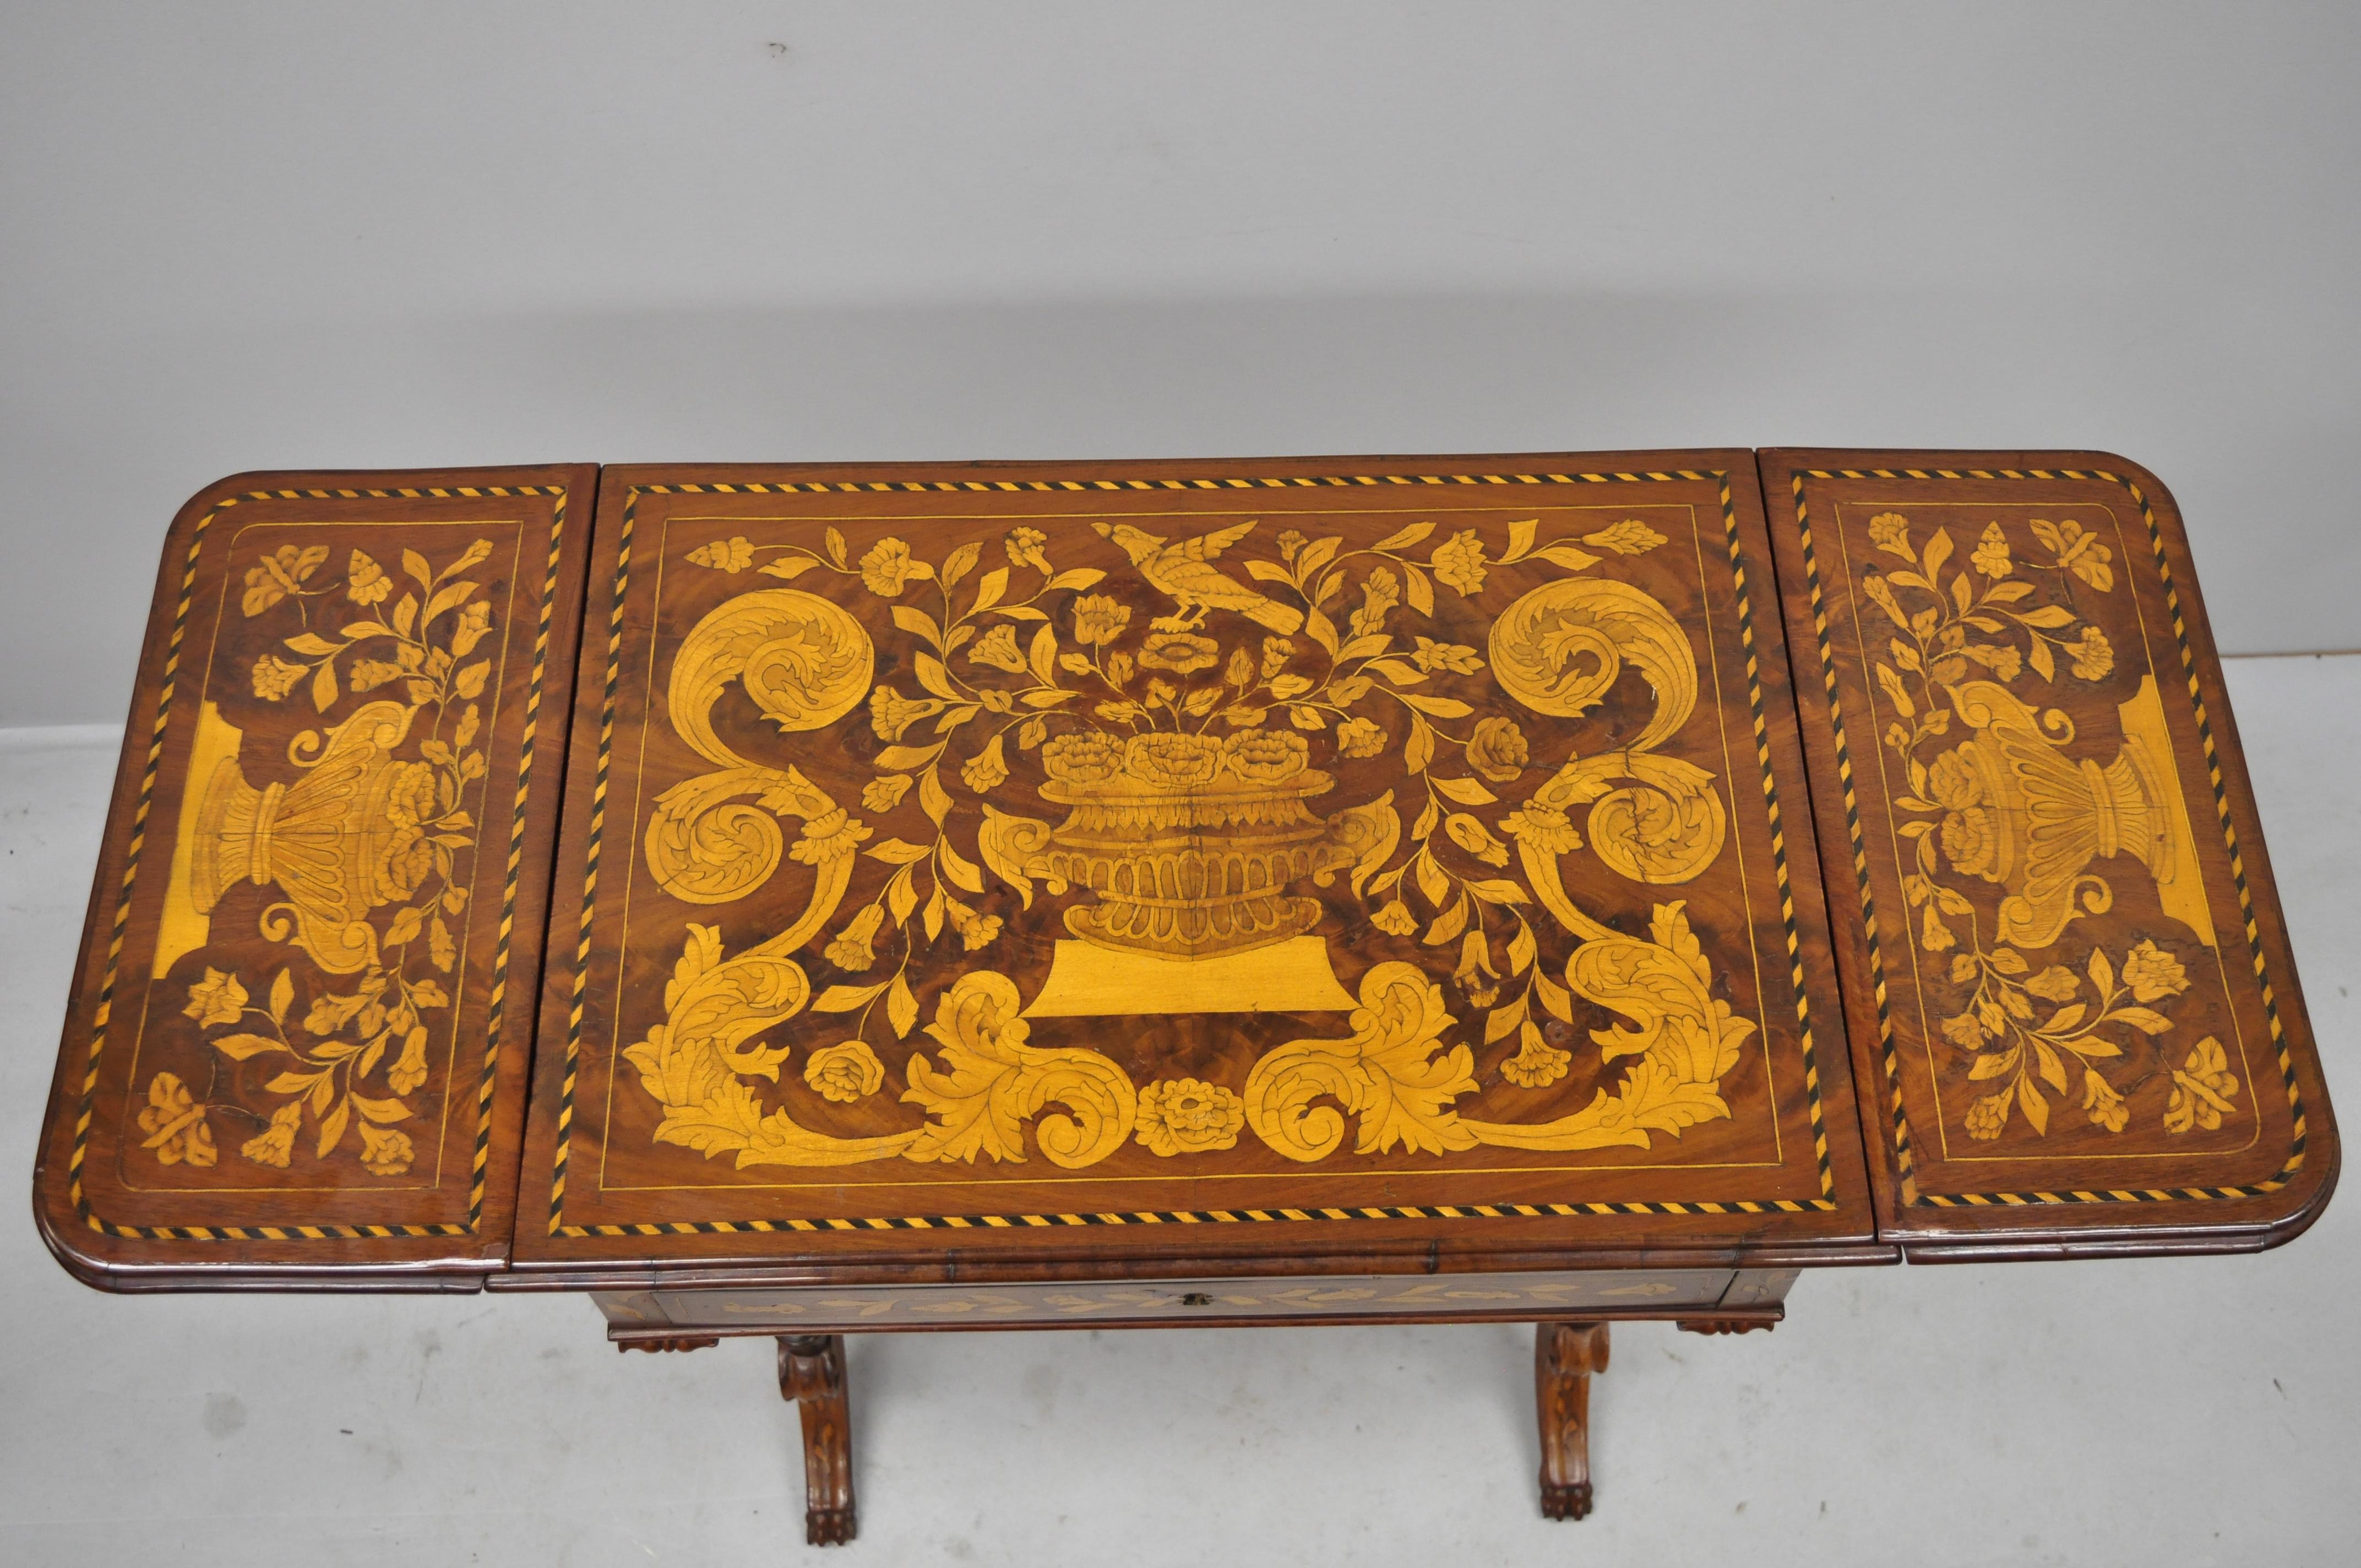 19th Century Dutch Marquetry Inlaid Regency Style Drop-Leaf Sewing Stand Work Table For Sale